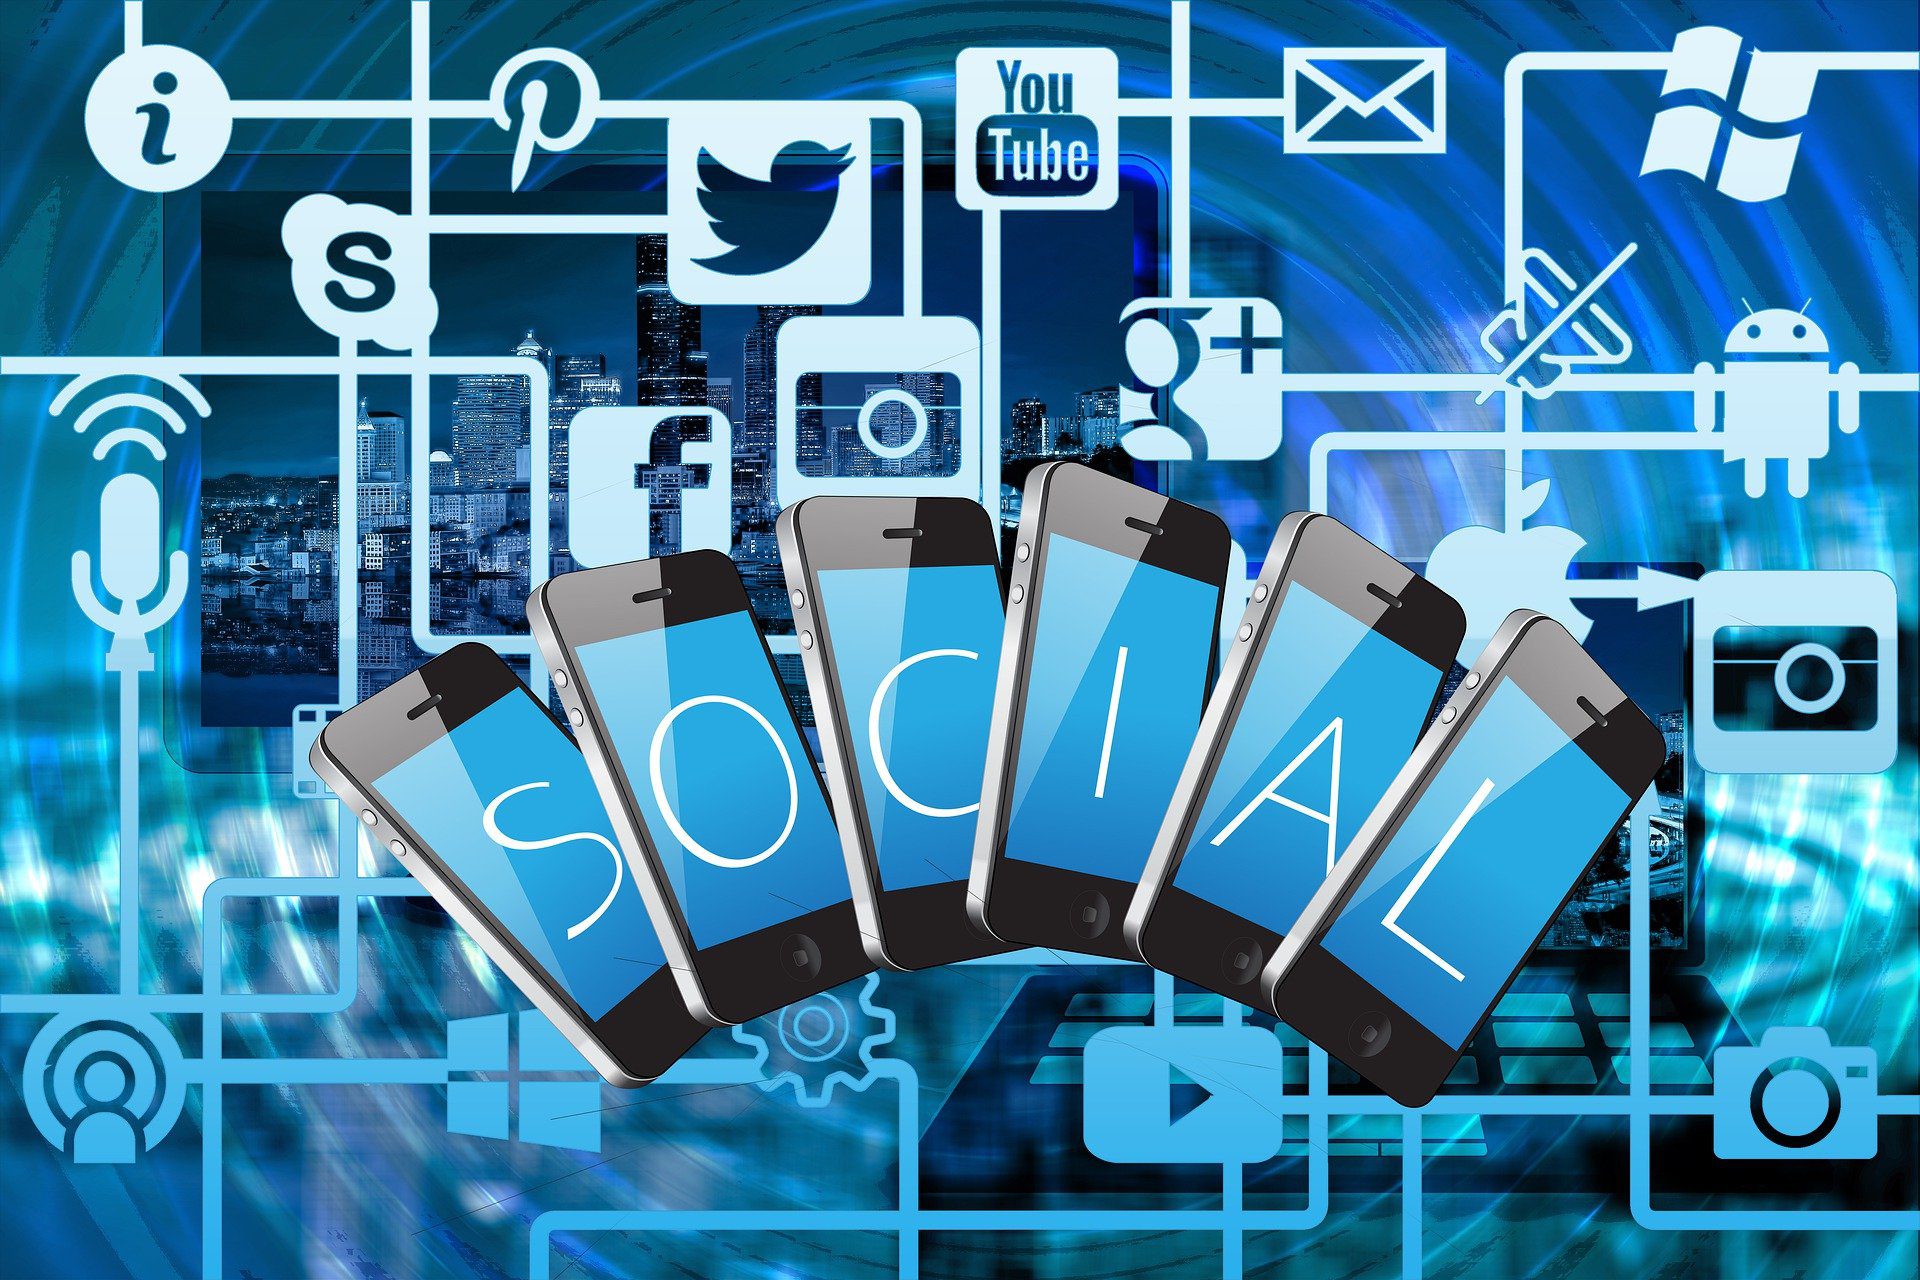 Why we conduct social media monitoring - image from pixabay by geralt